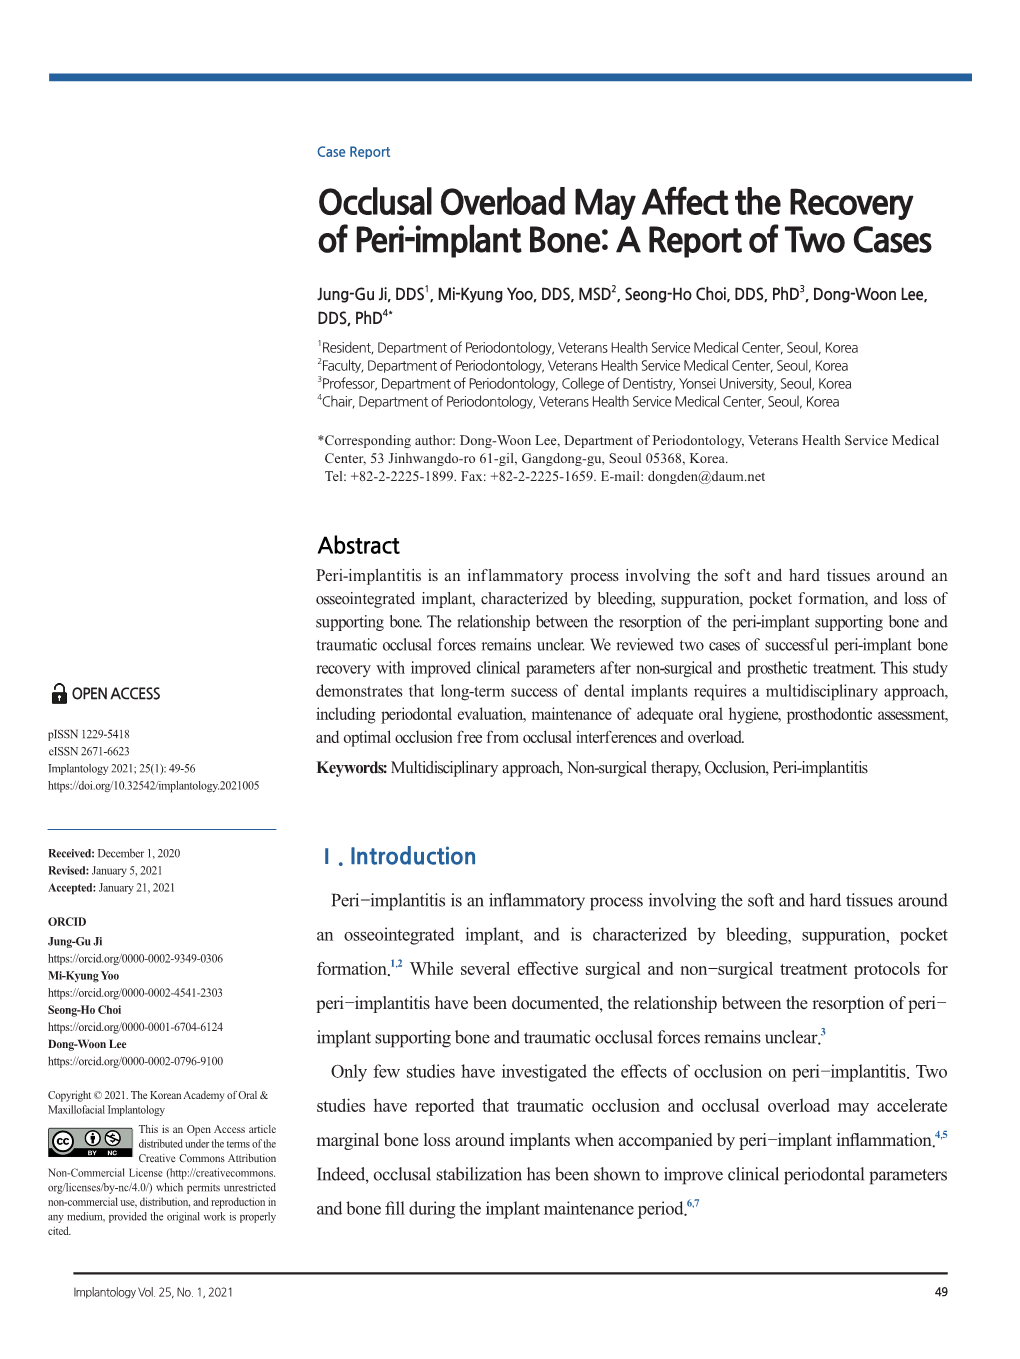 Occlusal Overload May Affect the Recovery of Peri-Implant Bone: a Report of Two Cases